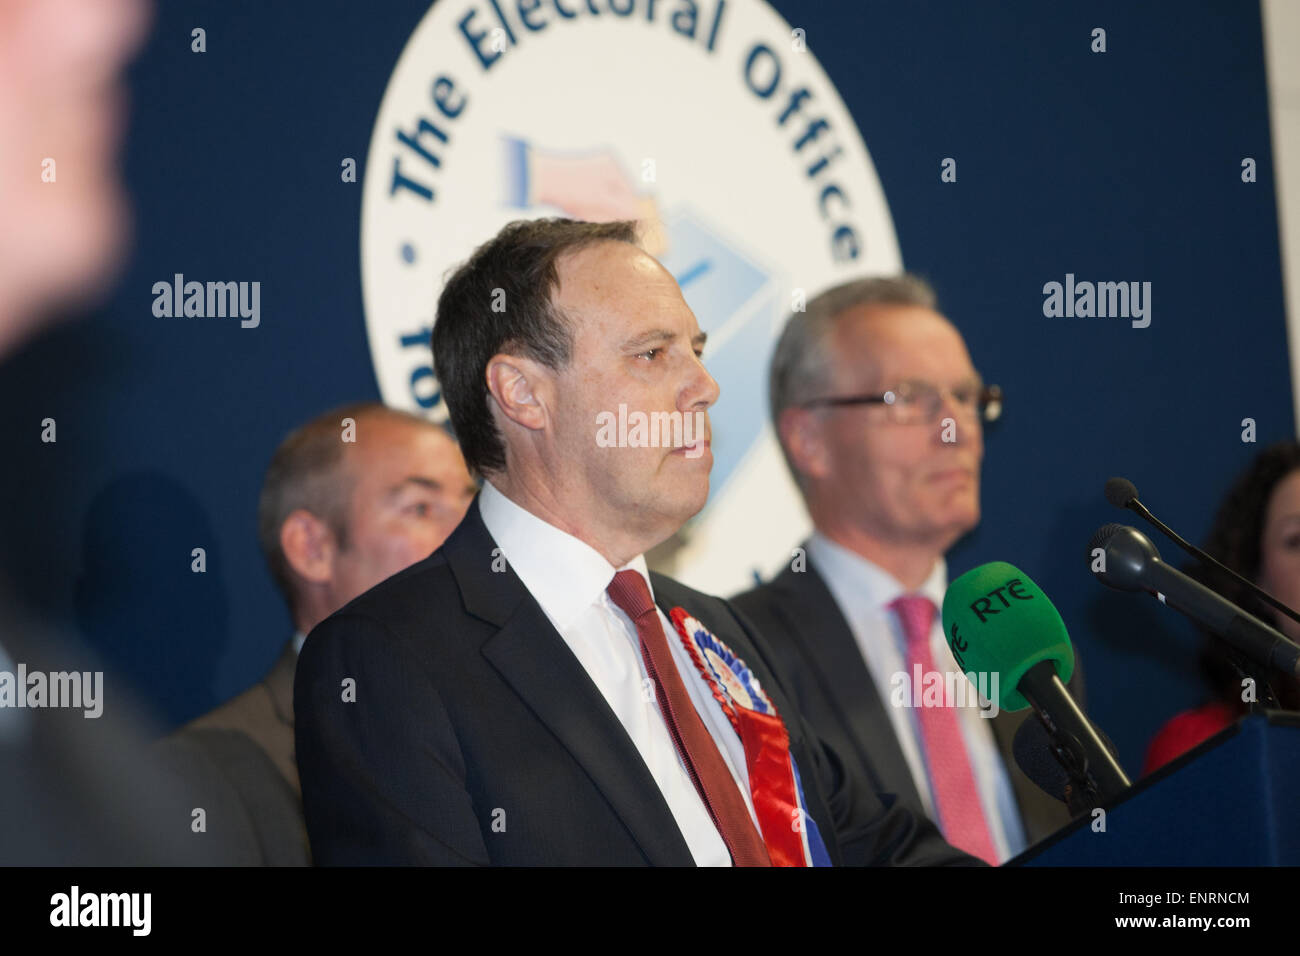 Belfast UK. 7th May 2015 General Election:  DUP Nigel Dodds (Gerry Kelly Sinn Fein in background) gives his acceptance speach af Stock Photo